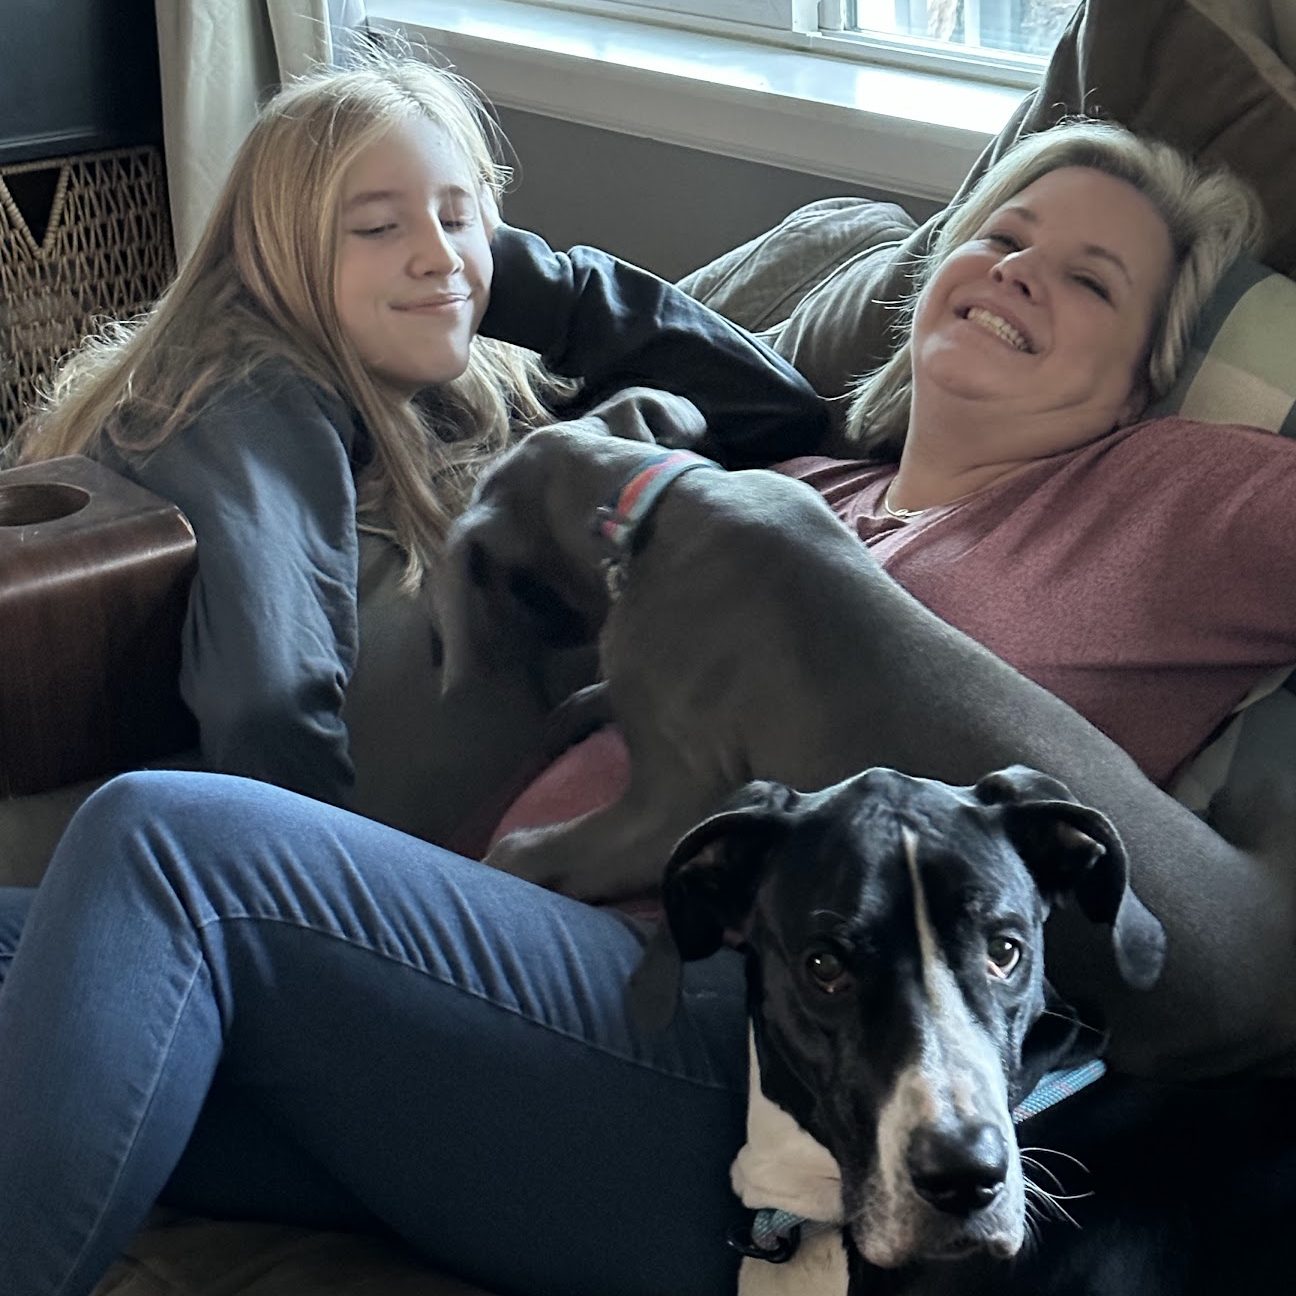 a woman and a teen snuggling on a couch with great danes.